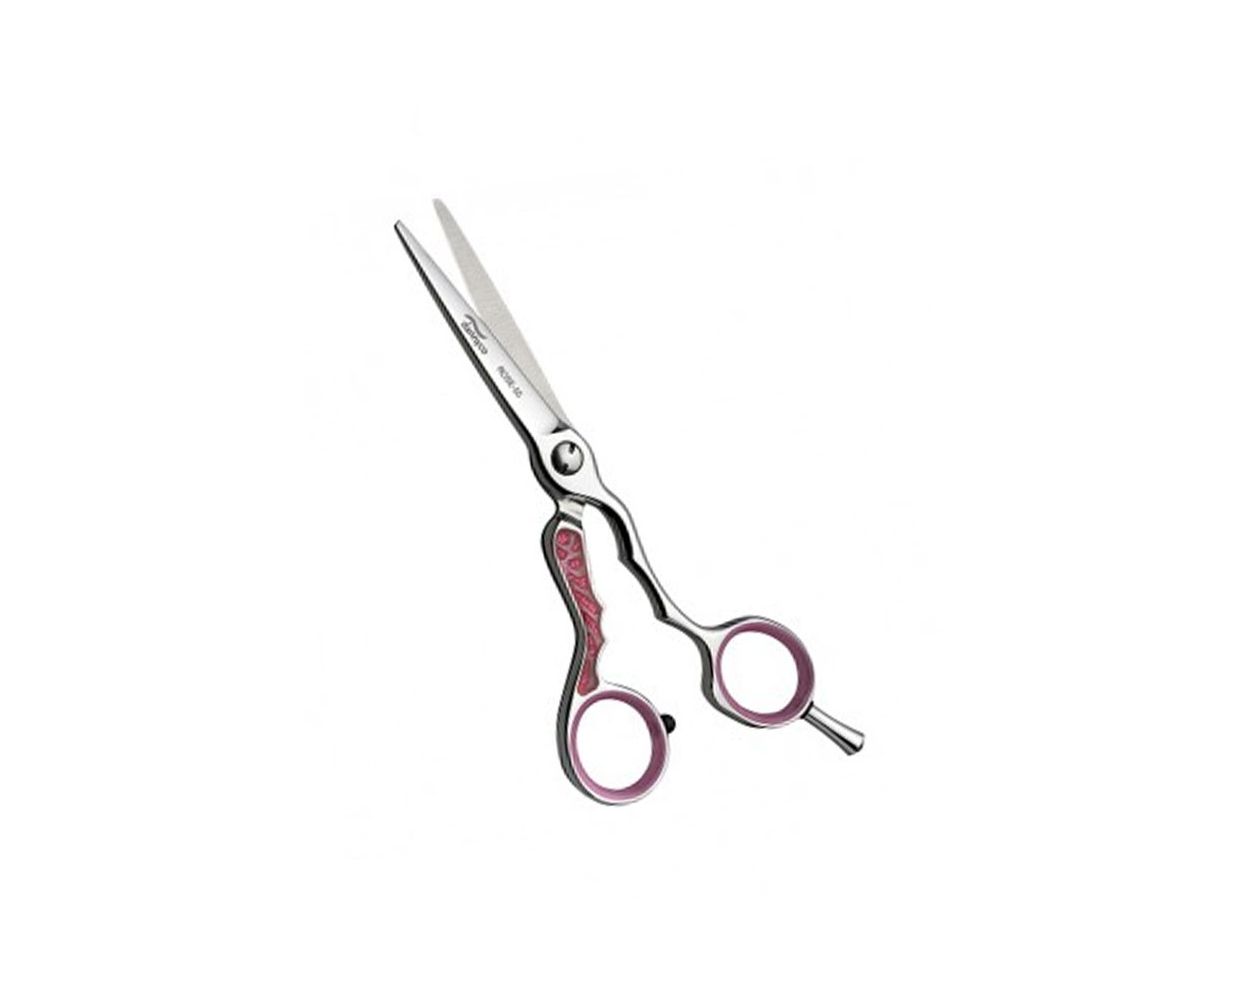 #ROSE55 THINK PINK SHEARS 5-1/2"